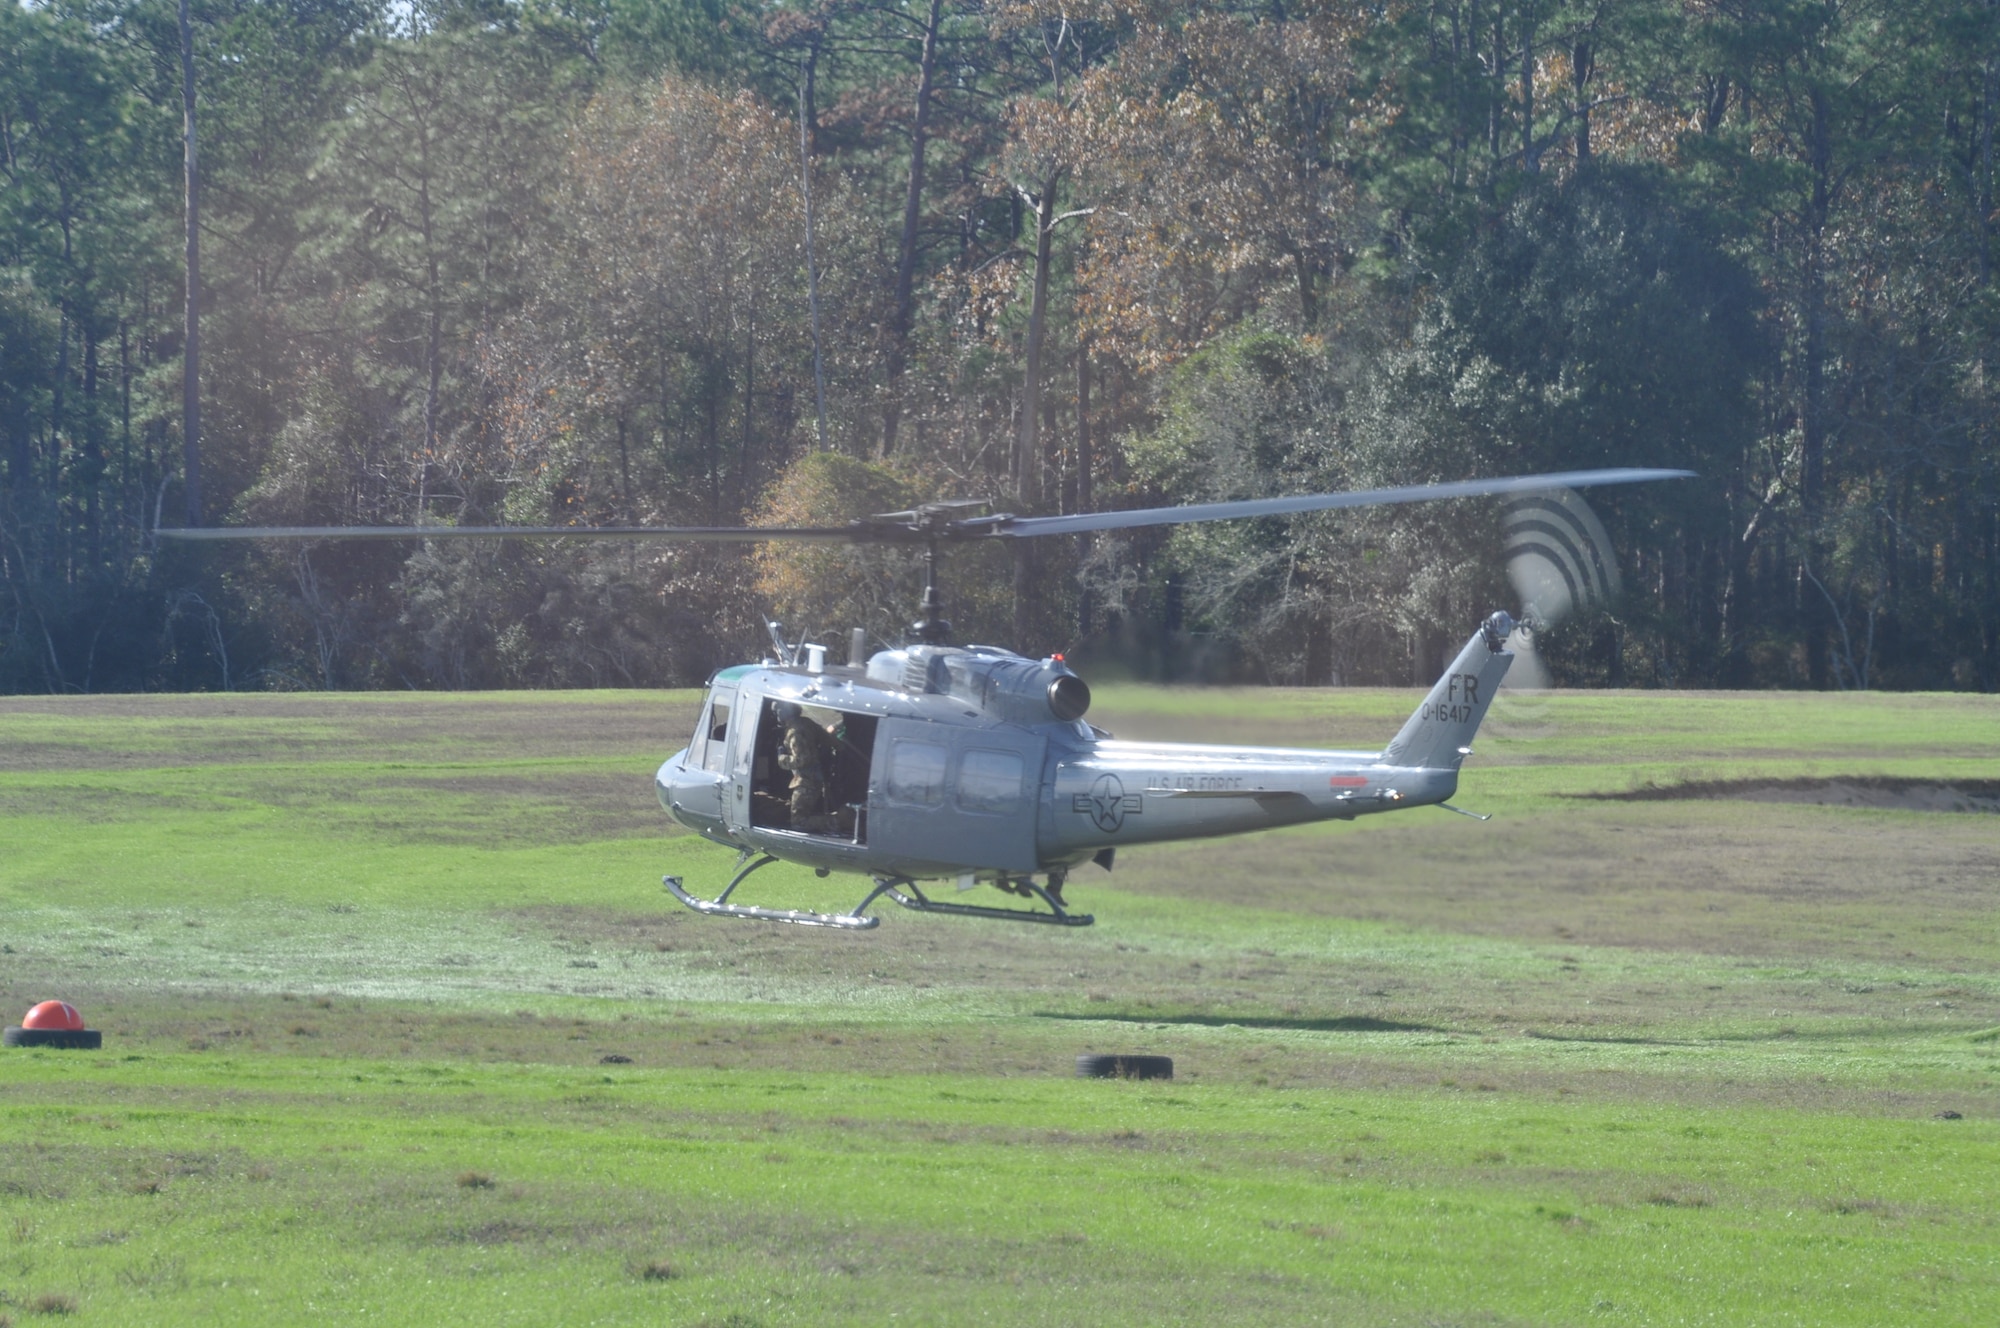 a helicopter lands